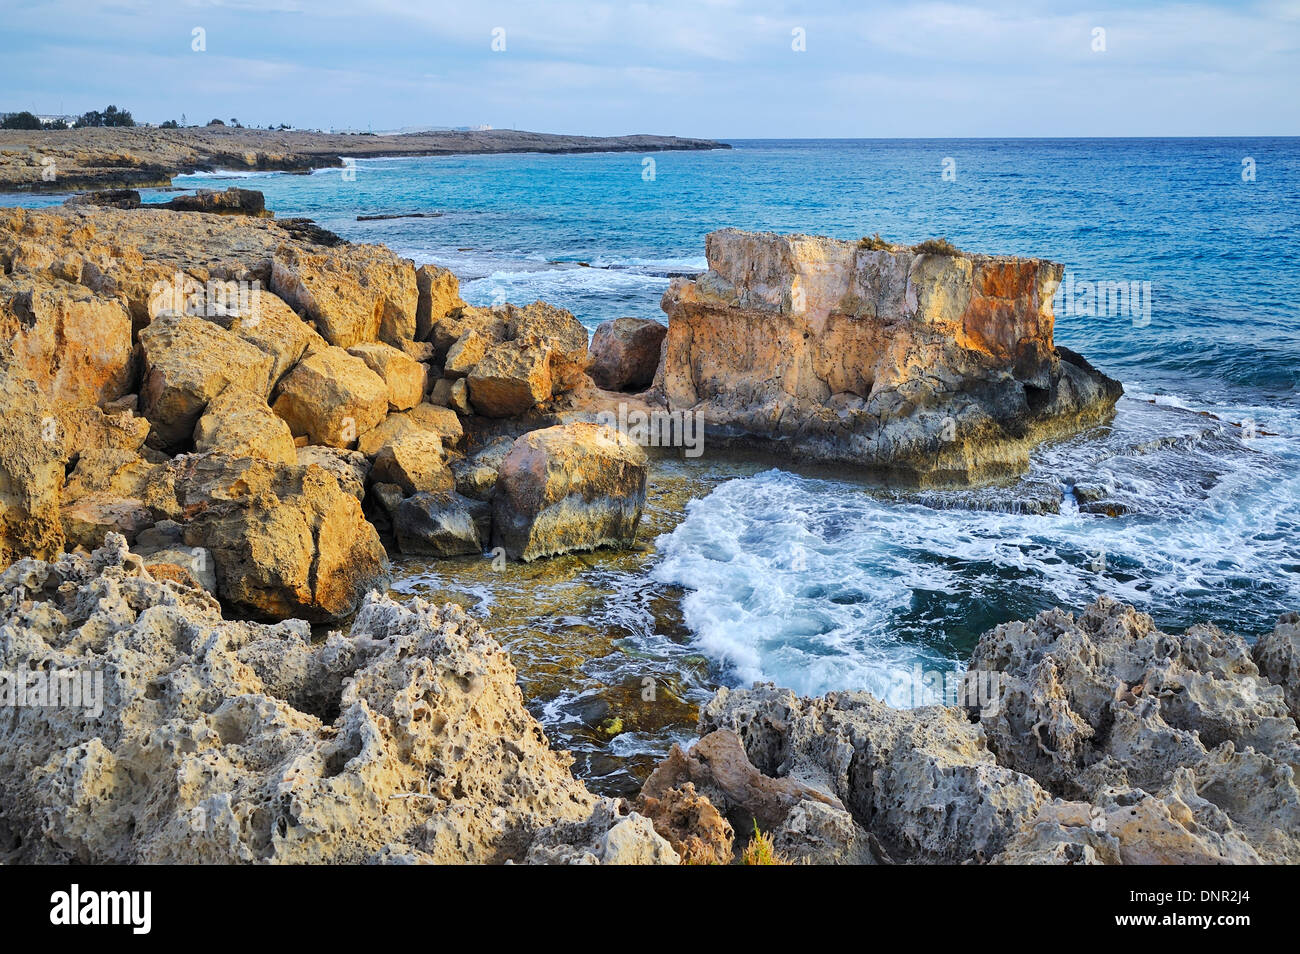 The rough and rocky coast line in Ayia Napa, Cyprus. Stock Photo